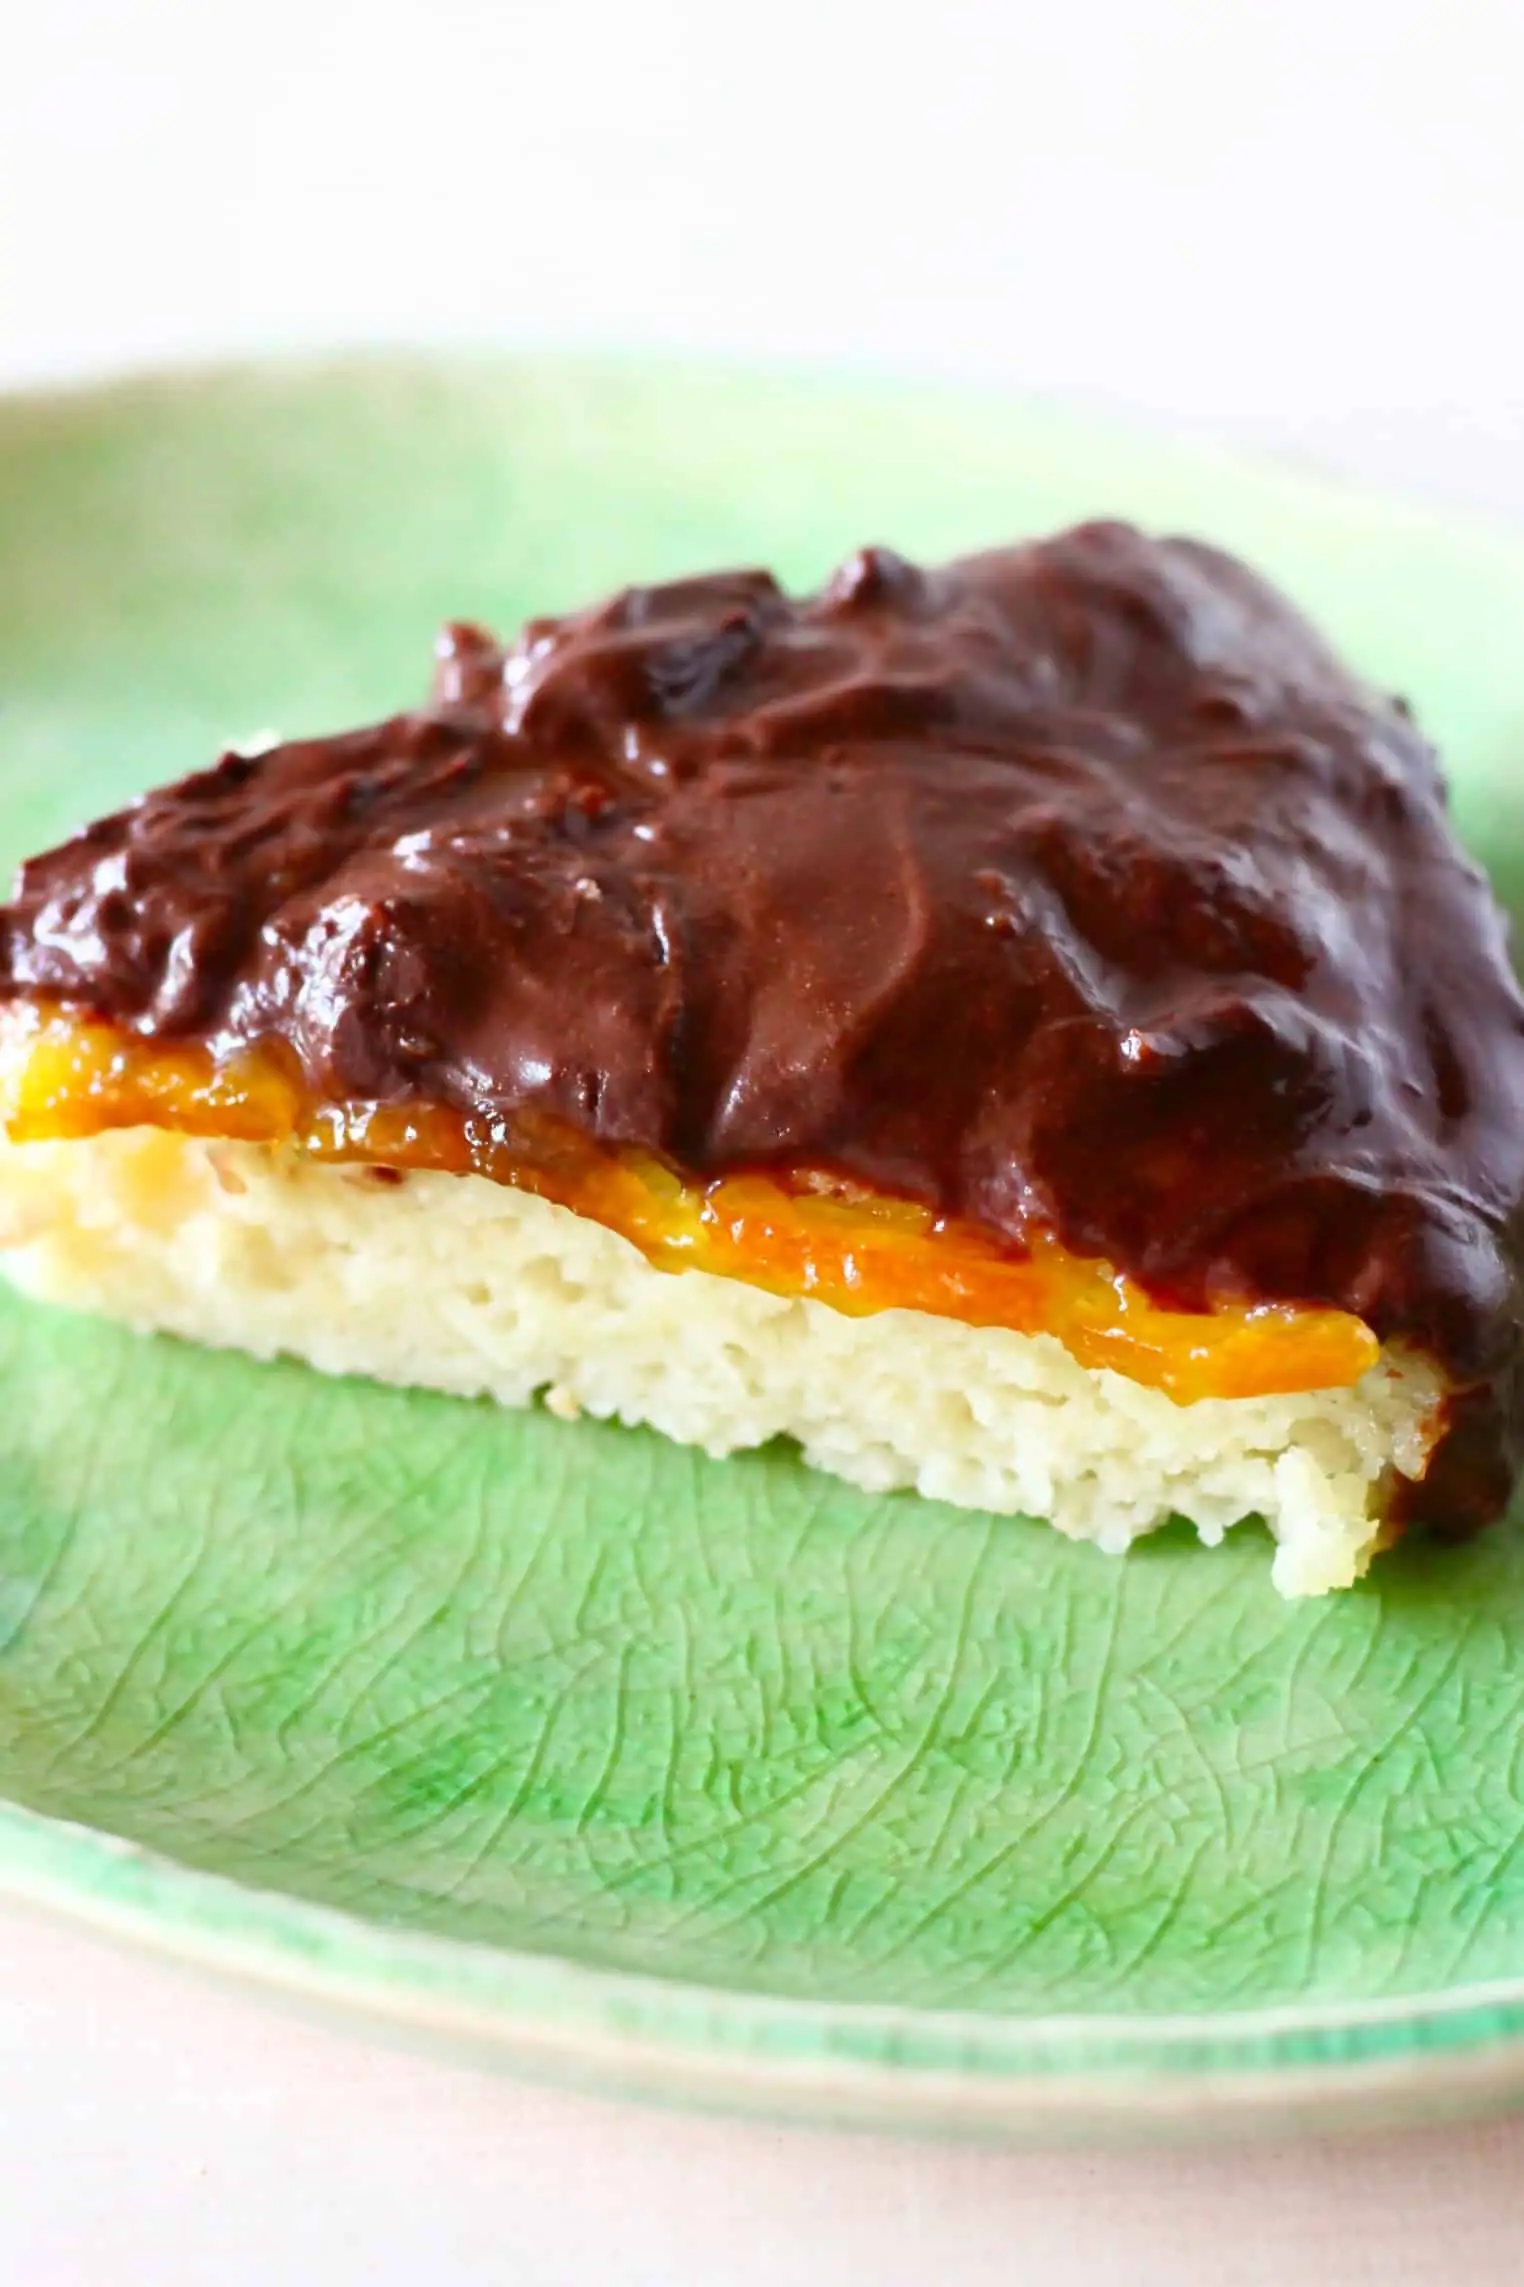 A slice of Jaffa cake topped with orange marmalade and a chocolate ganache on a green plate